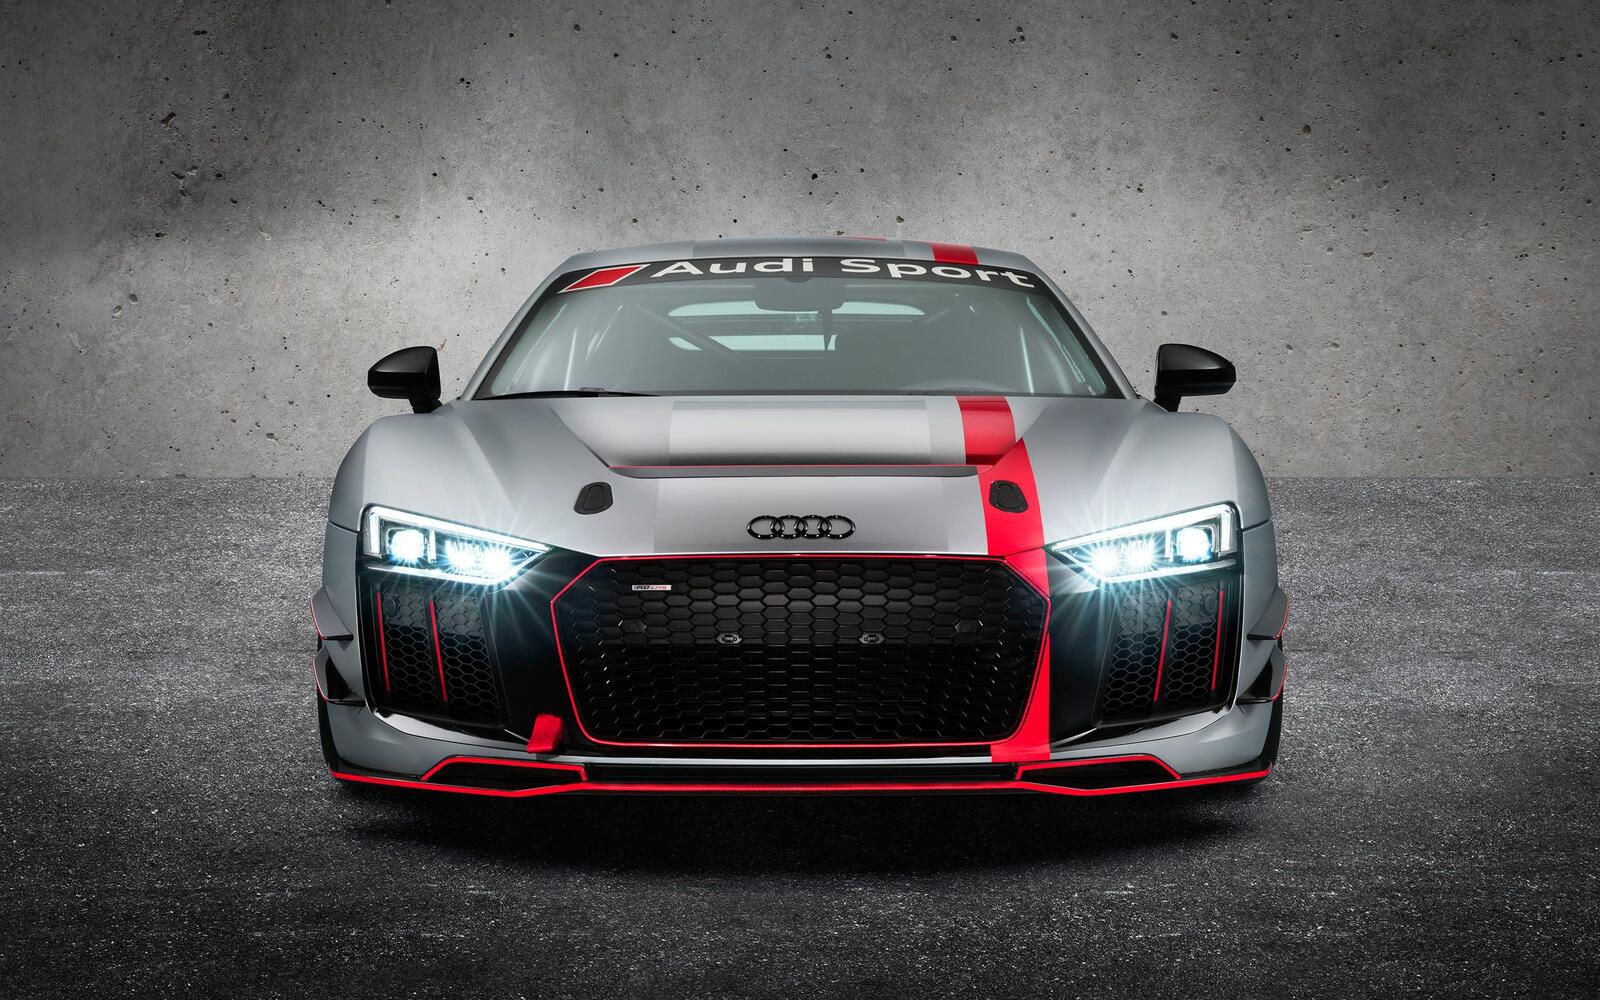 Wallpapers wallpaper audi r8 lms gt4 view from front cars on the desktop